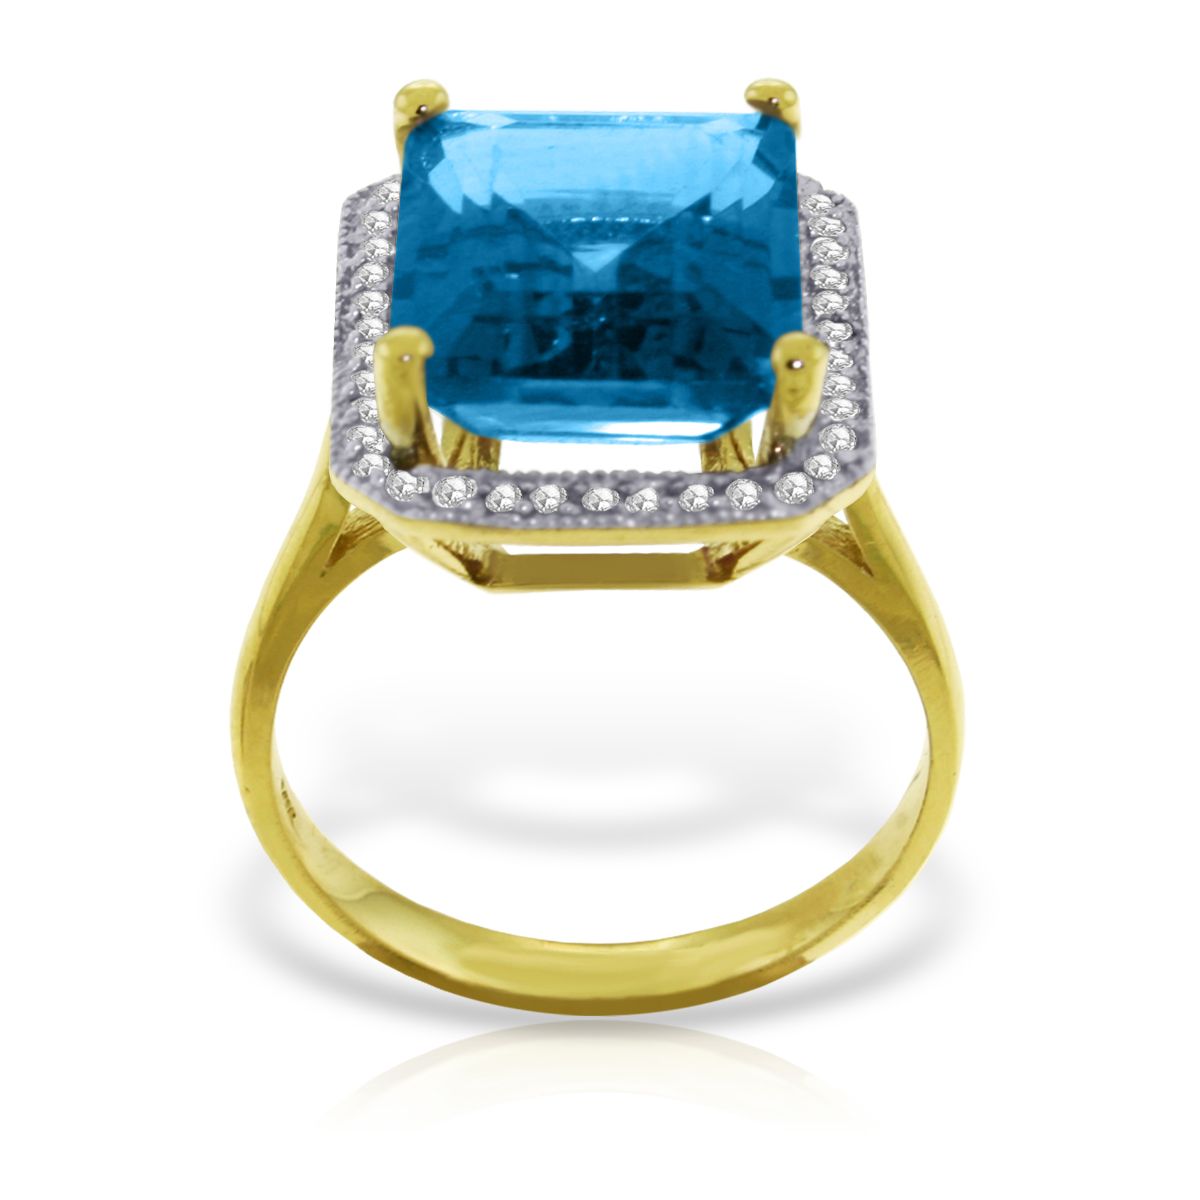   Certified 7.8 Ct RING NATURAL Diamond BLUE TOPAZ 14K Solid Yellow Gold